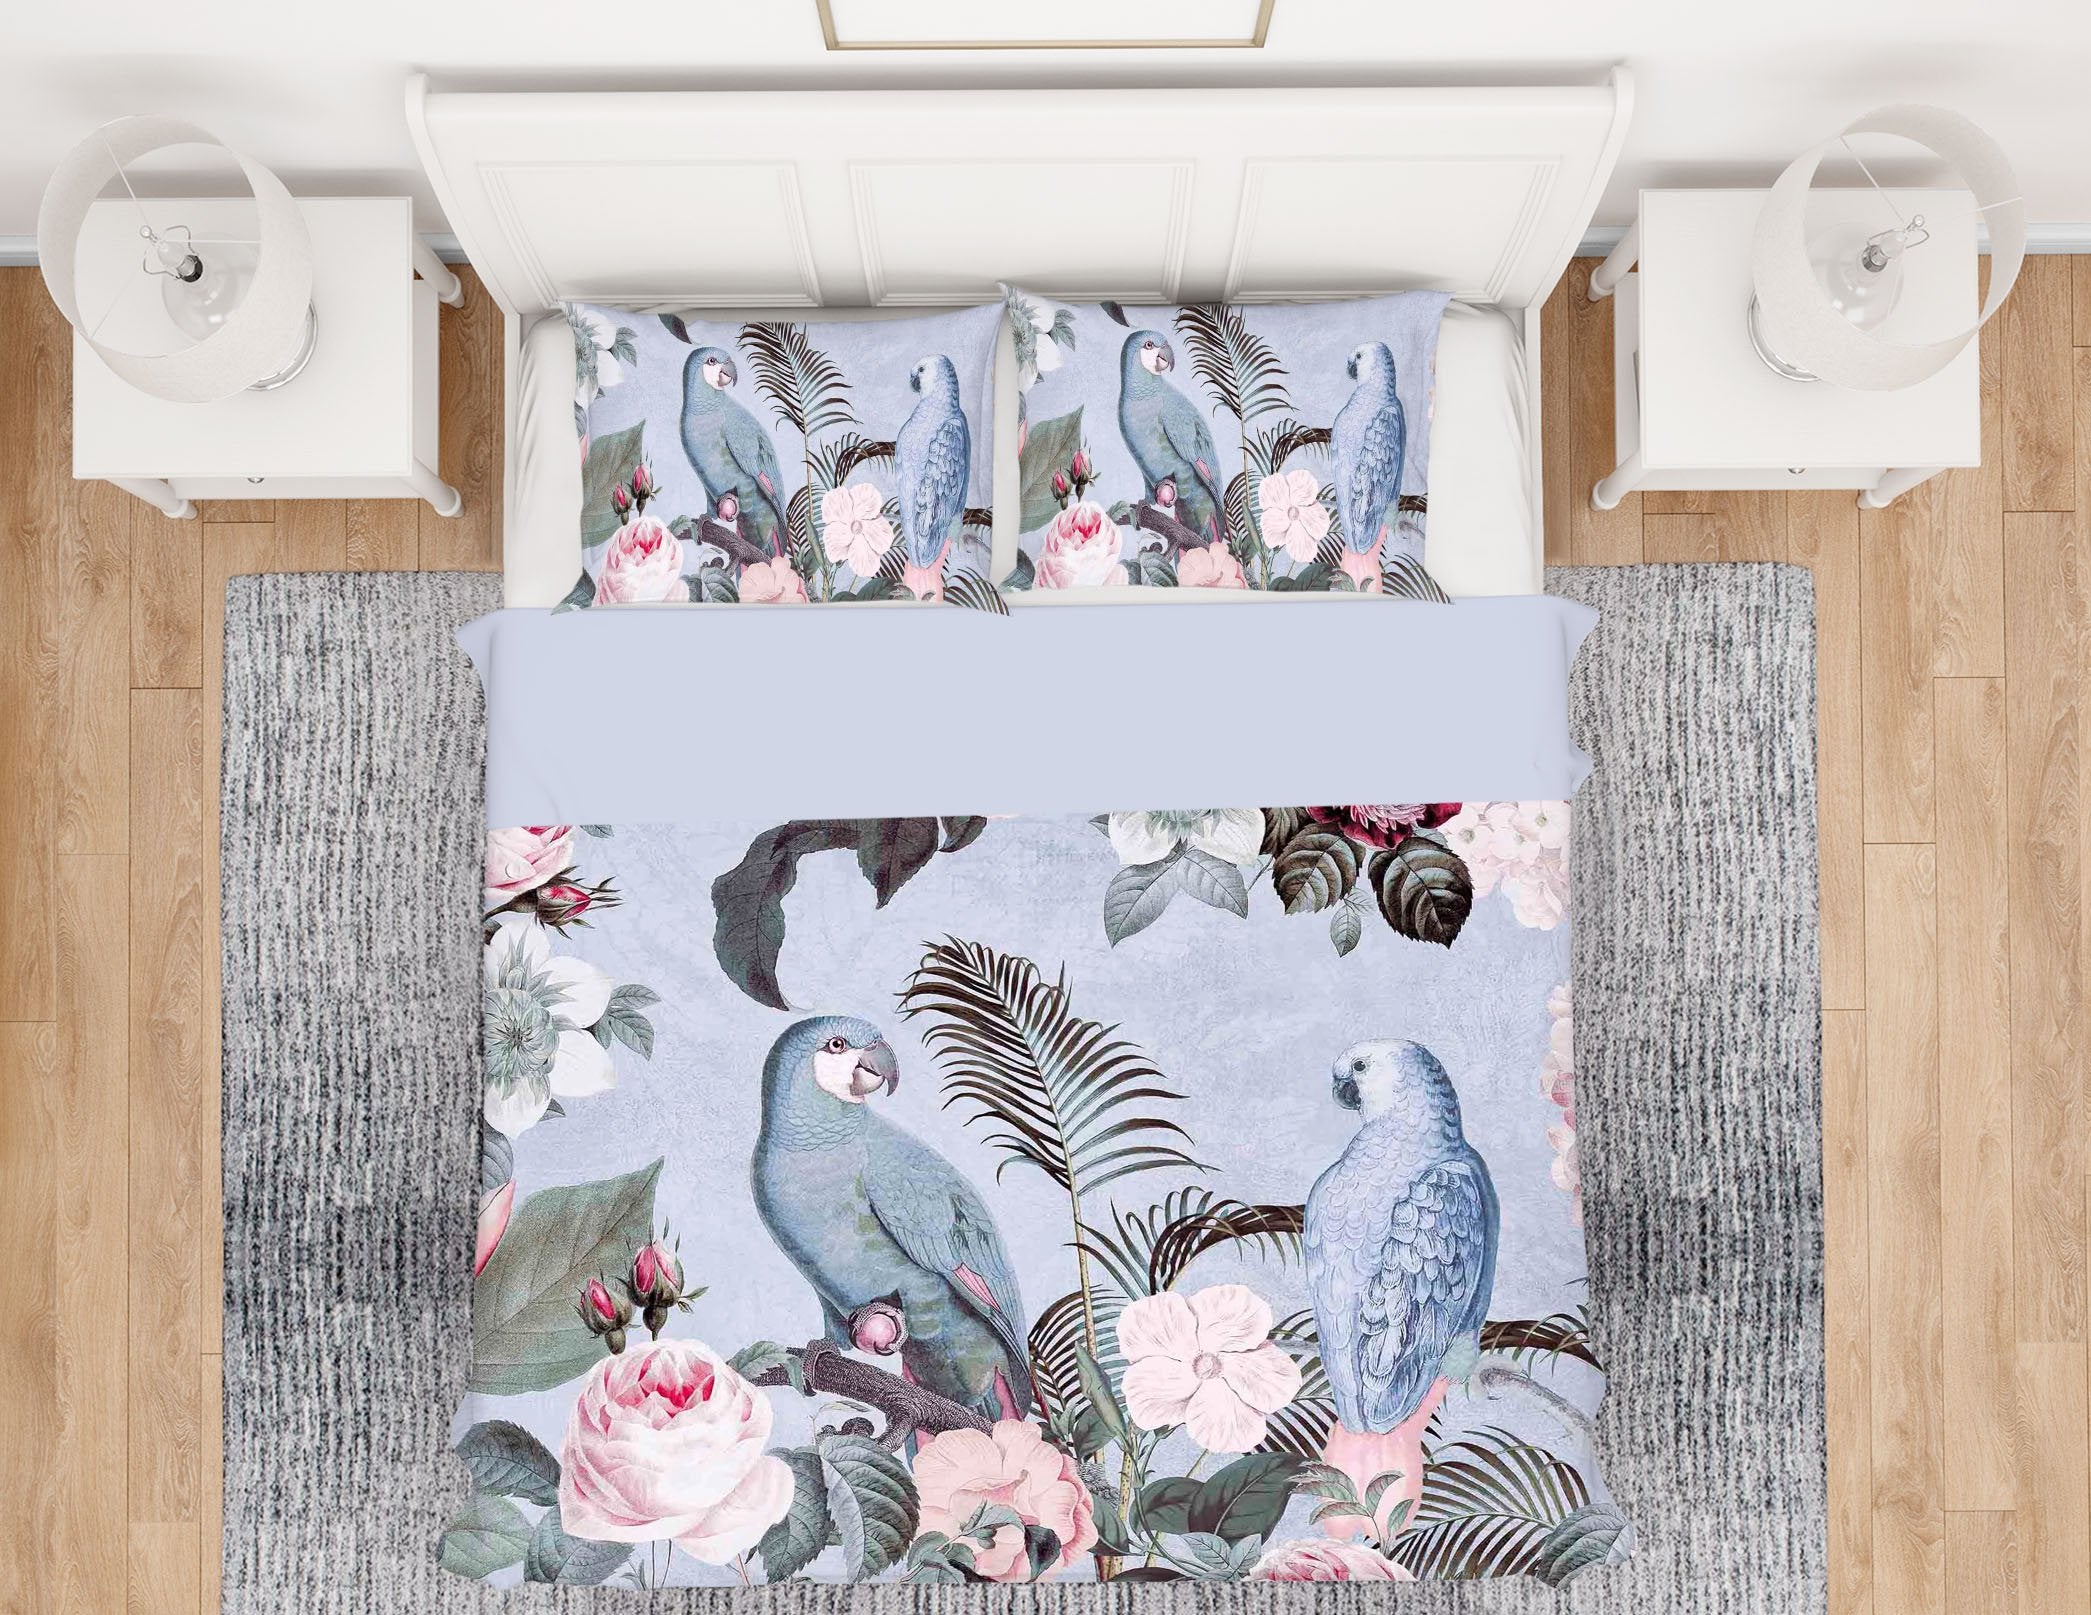 3D Bird Family 2128 Andrea haase Bedding Bed Pillowcases Quilt Quiet Covers AJ Creativity Home 